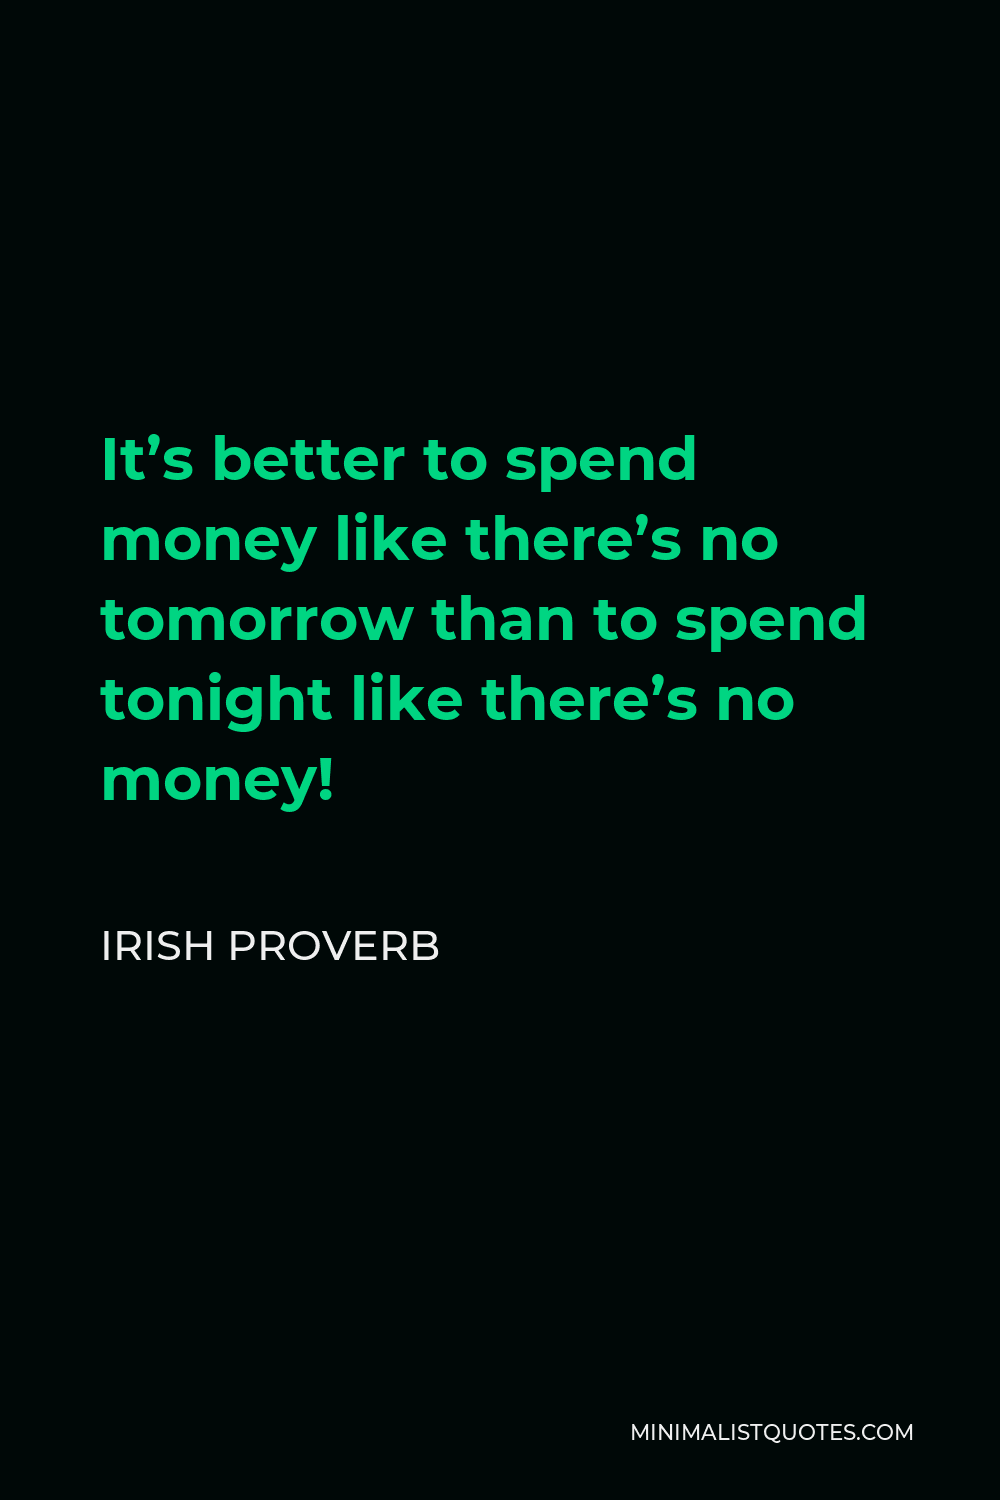 Irish Proverb Quote - It’s better to spend money like there’s no tomorrow than to spend tonight like there’s no money!